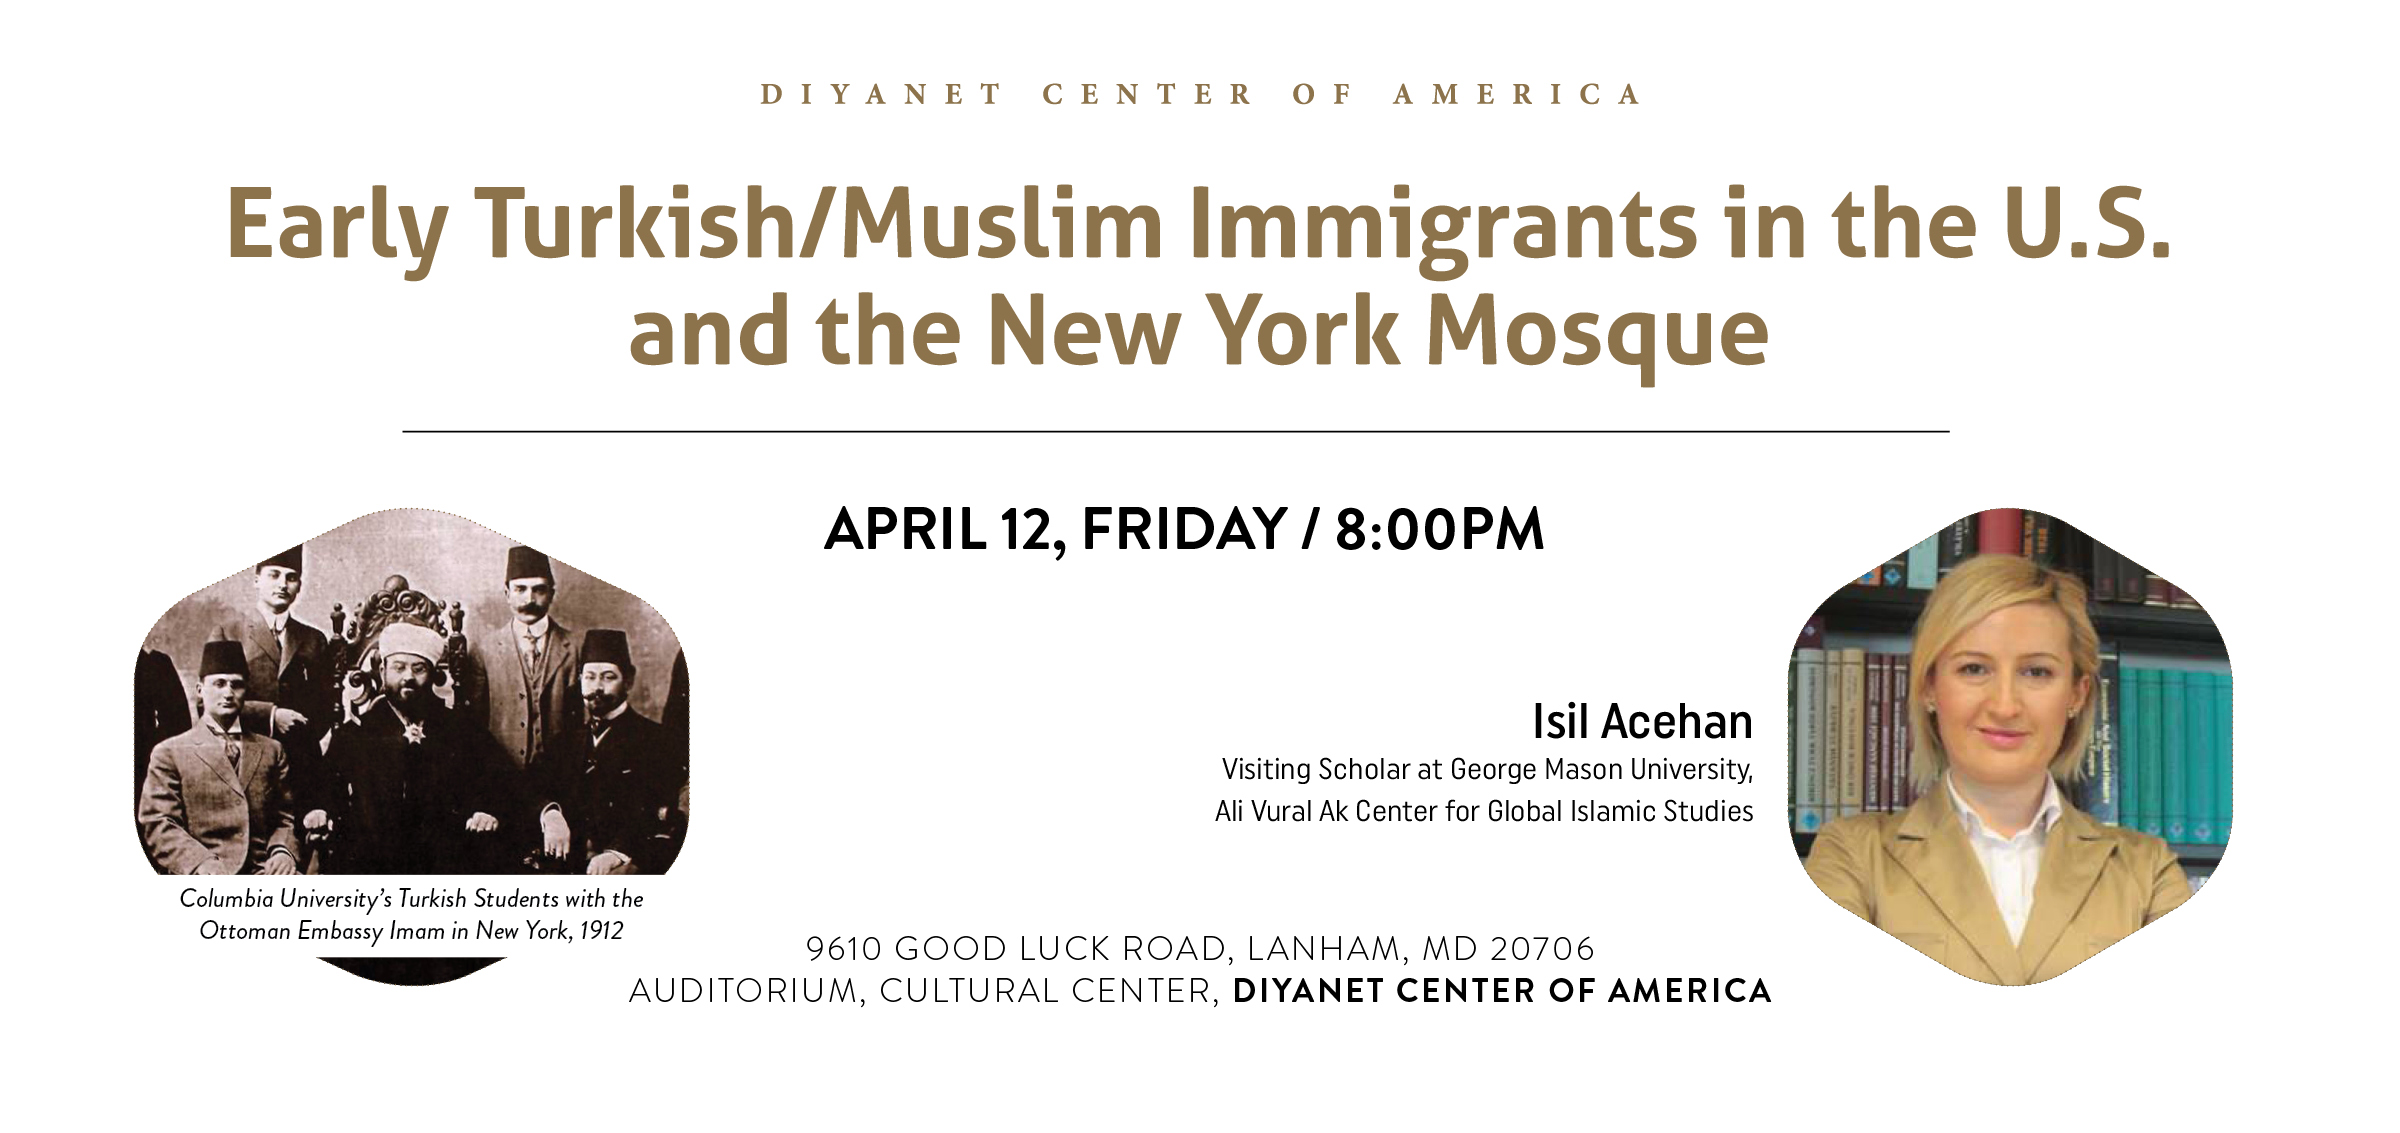 Early Turkish/Muslim Immigrants in the U.S. and the New York Mosque